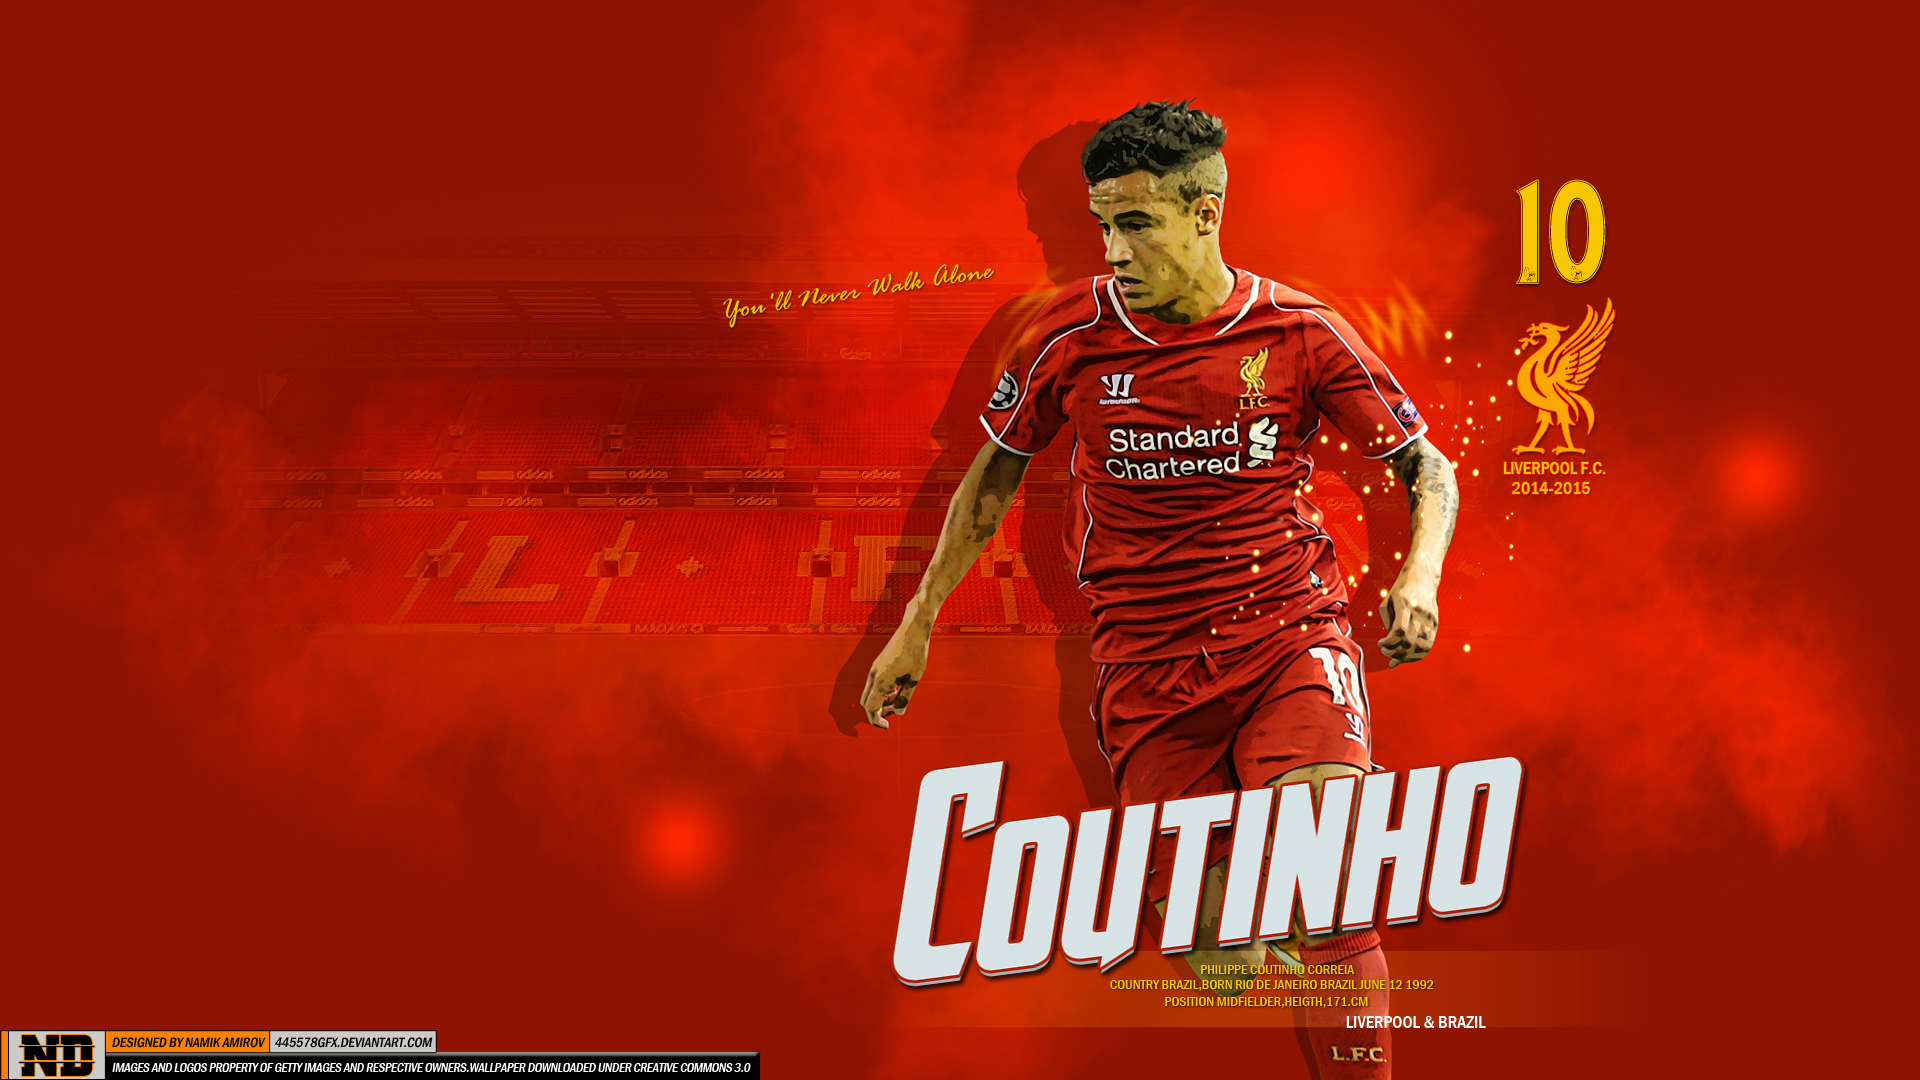 Philippe coutinho hd liverpool fc